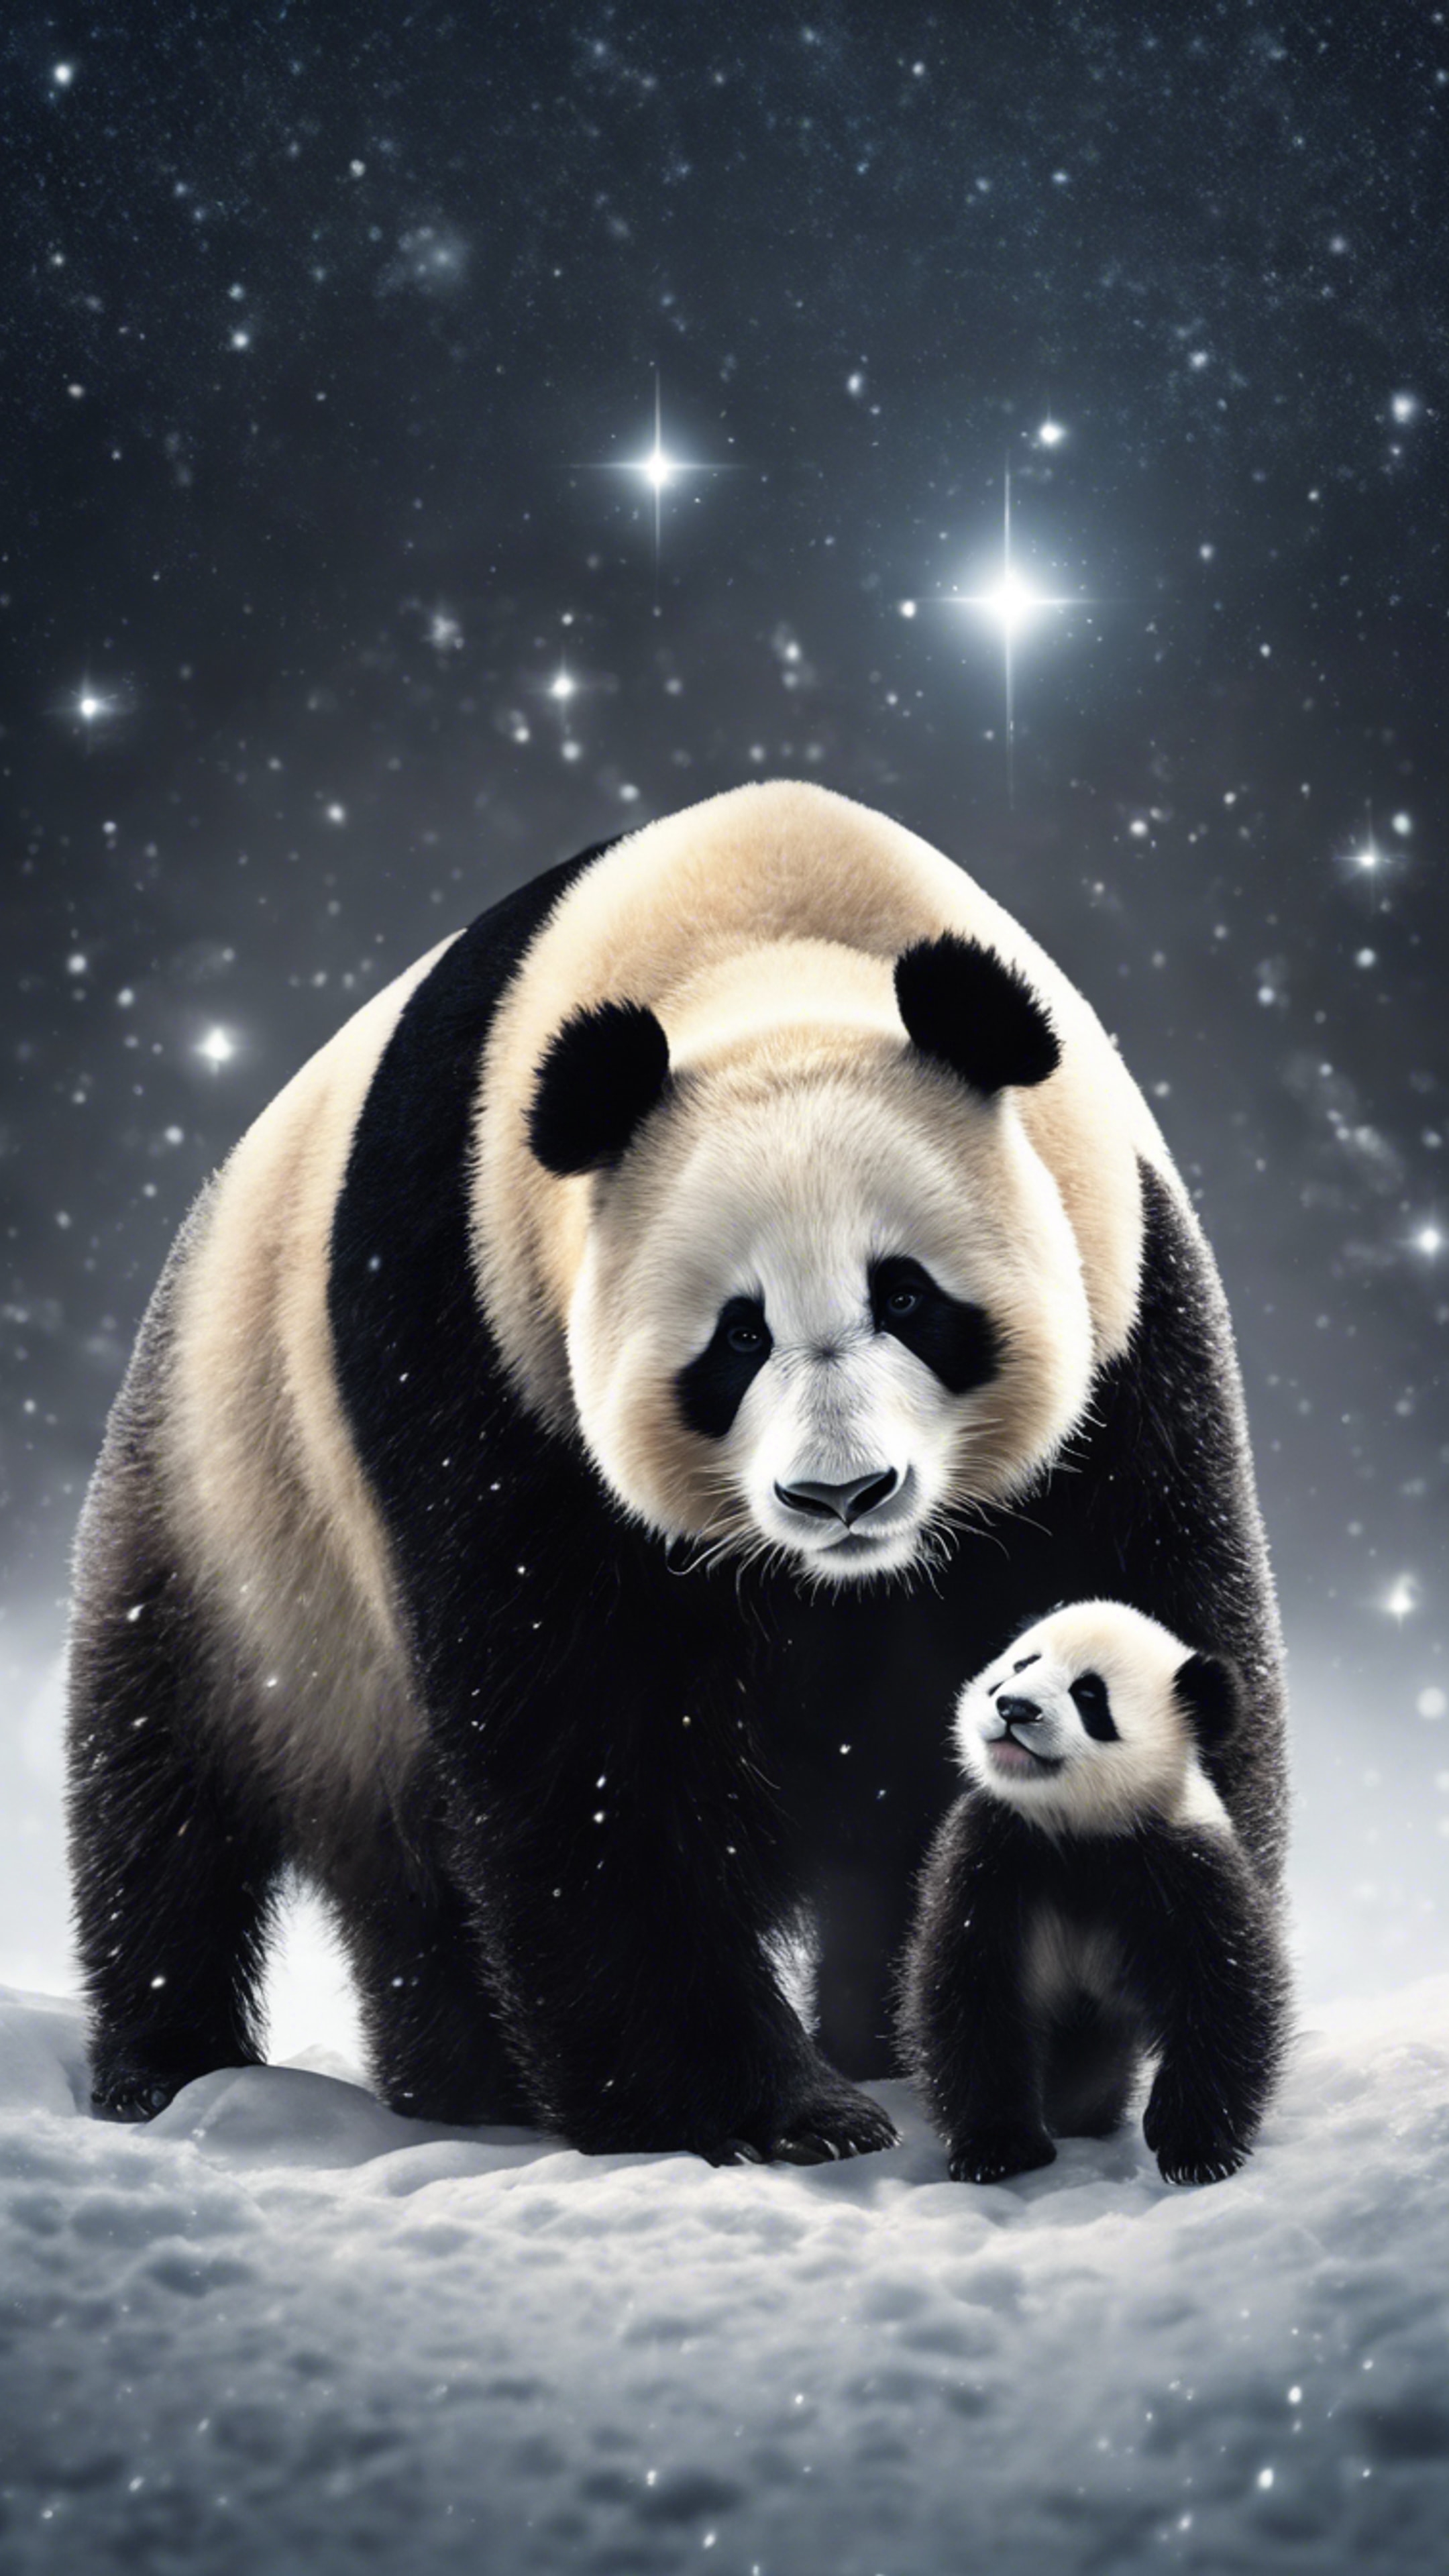 A mother panda with her cubs, peacefully taking a stroll on a silent, snowy night under a blanket of stars. Tapet[875b5ef660eb48ddb691]